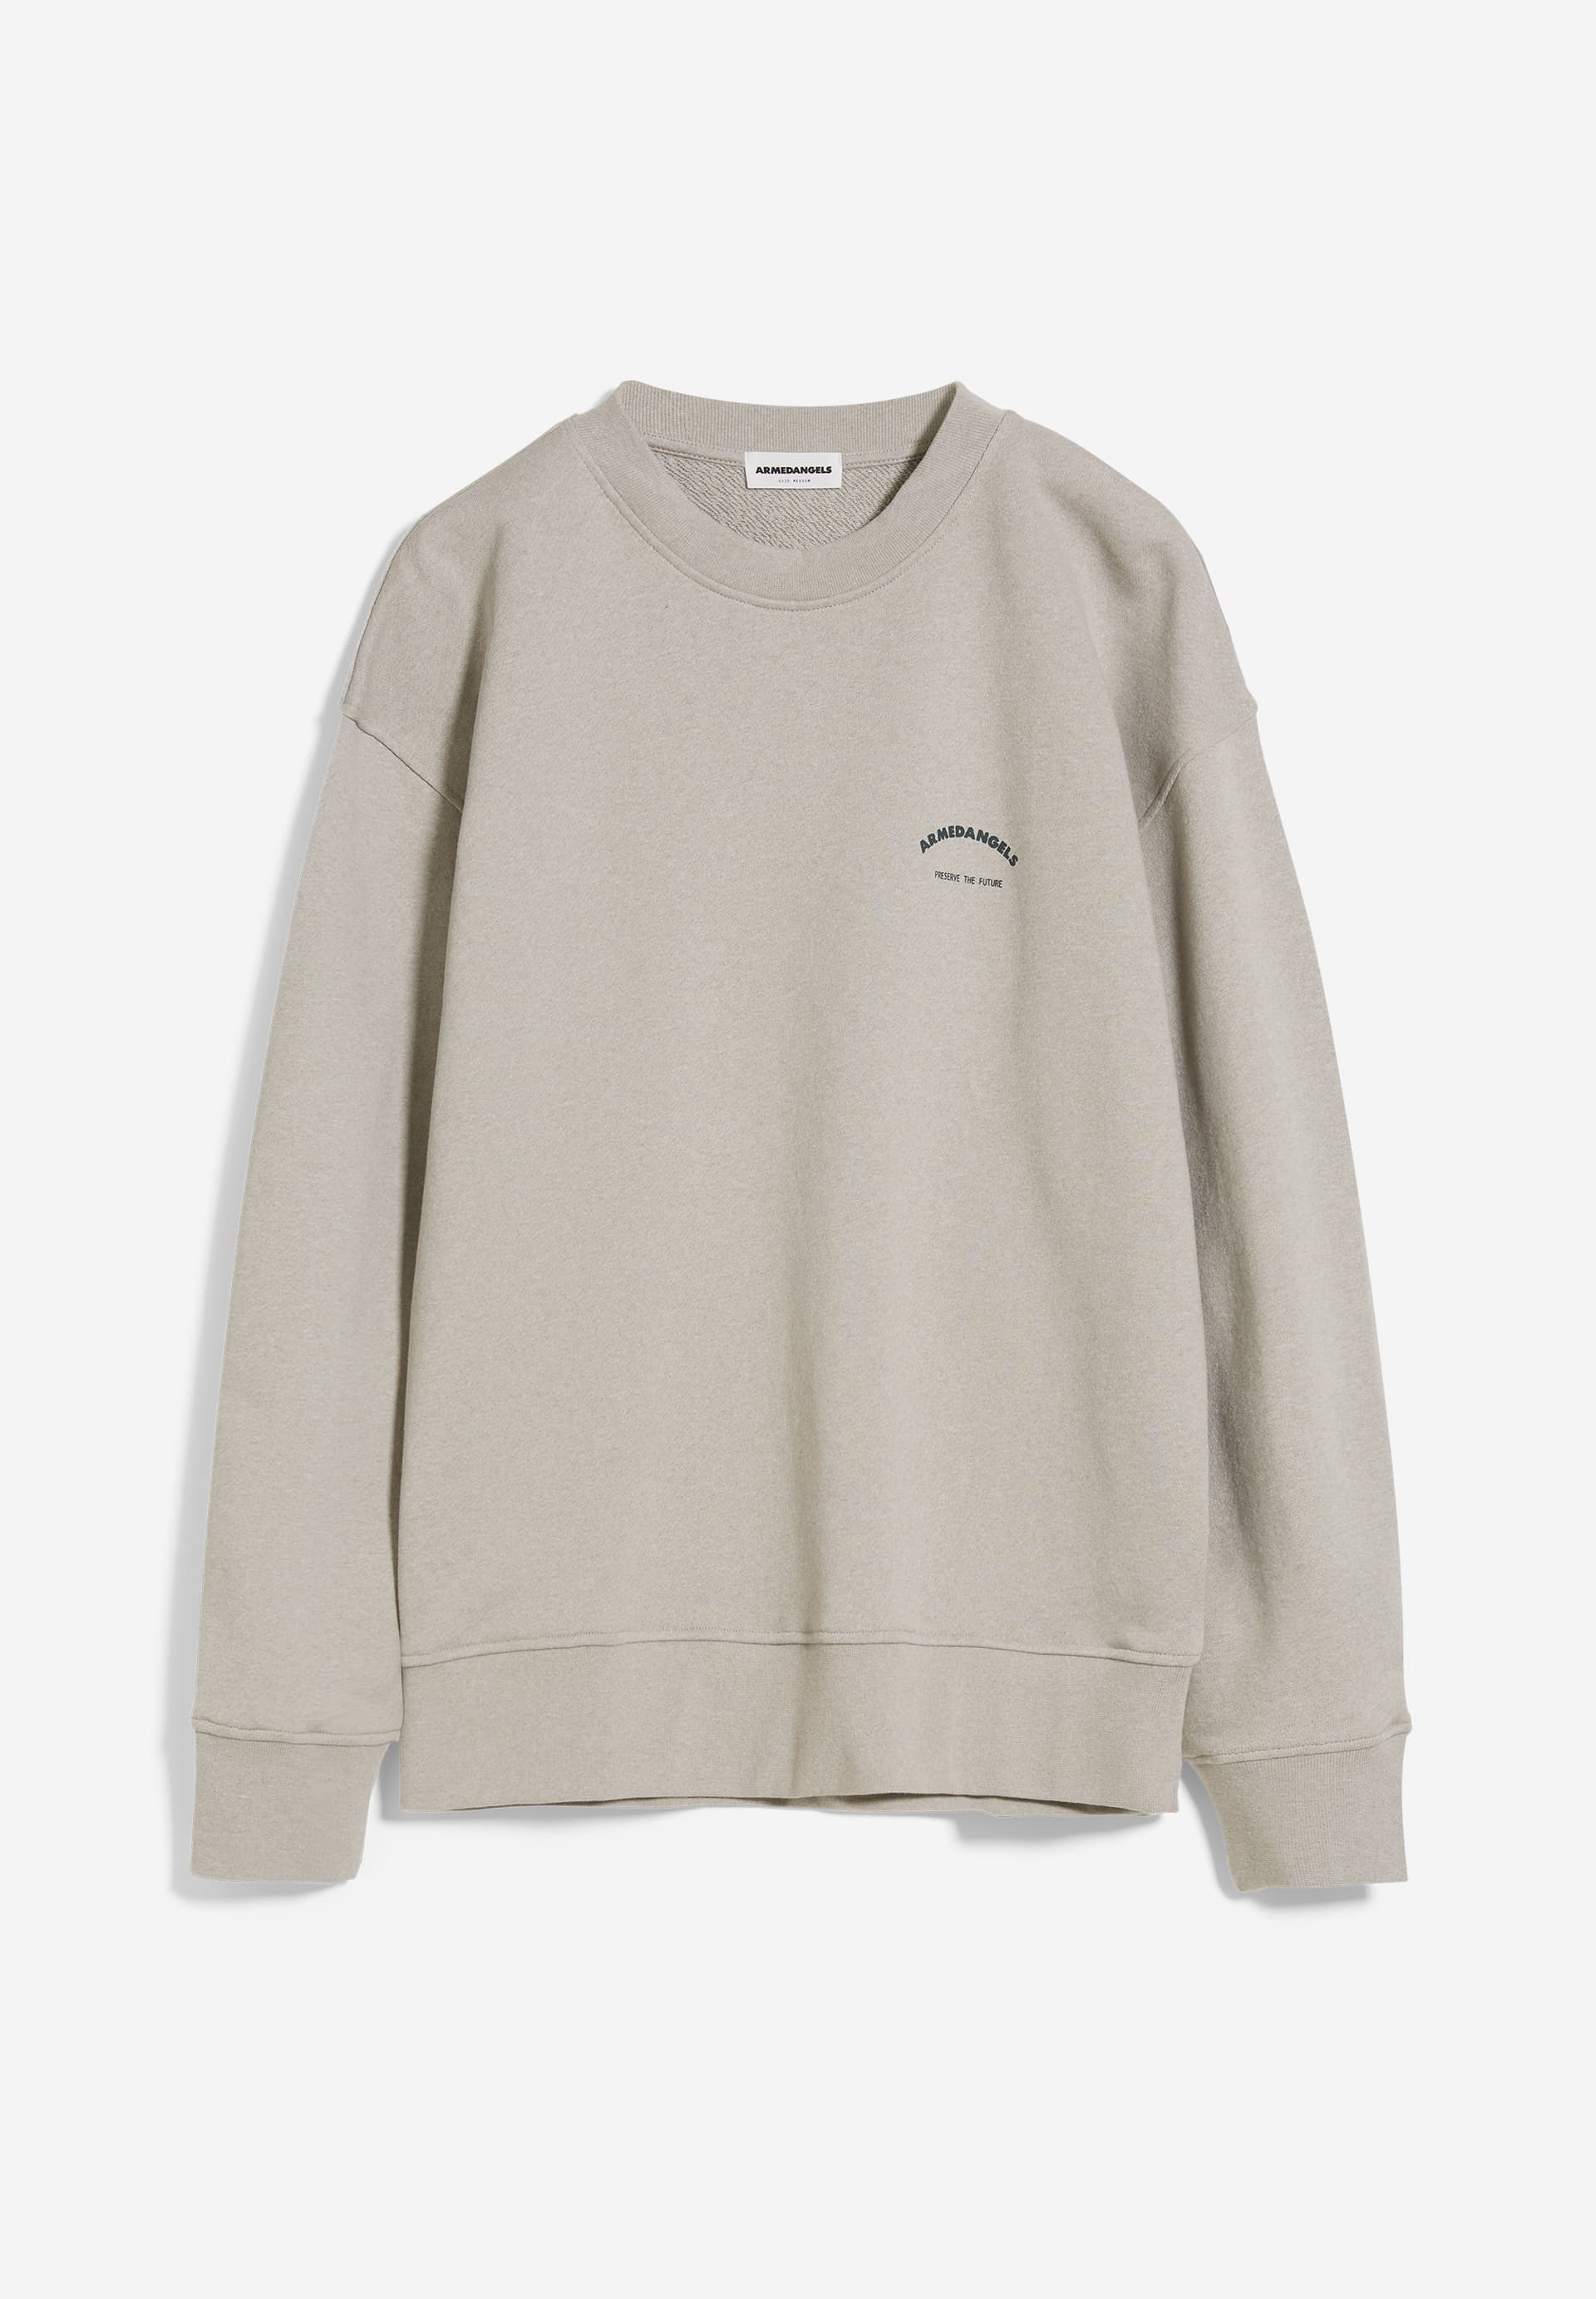 AARLO HELLOCINATION Sweatshirt Relaxed Fit made of Organic Cotton Mix